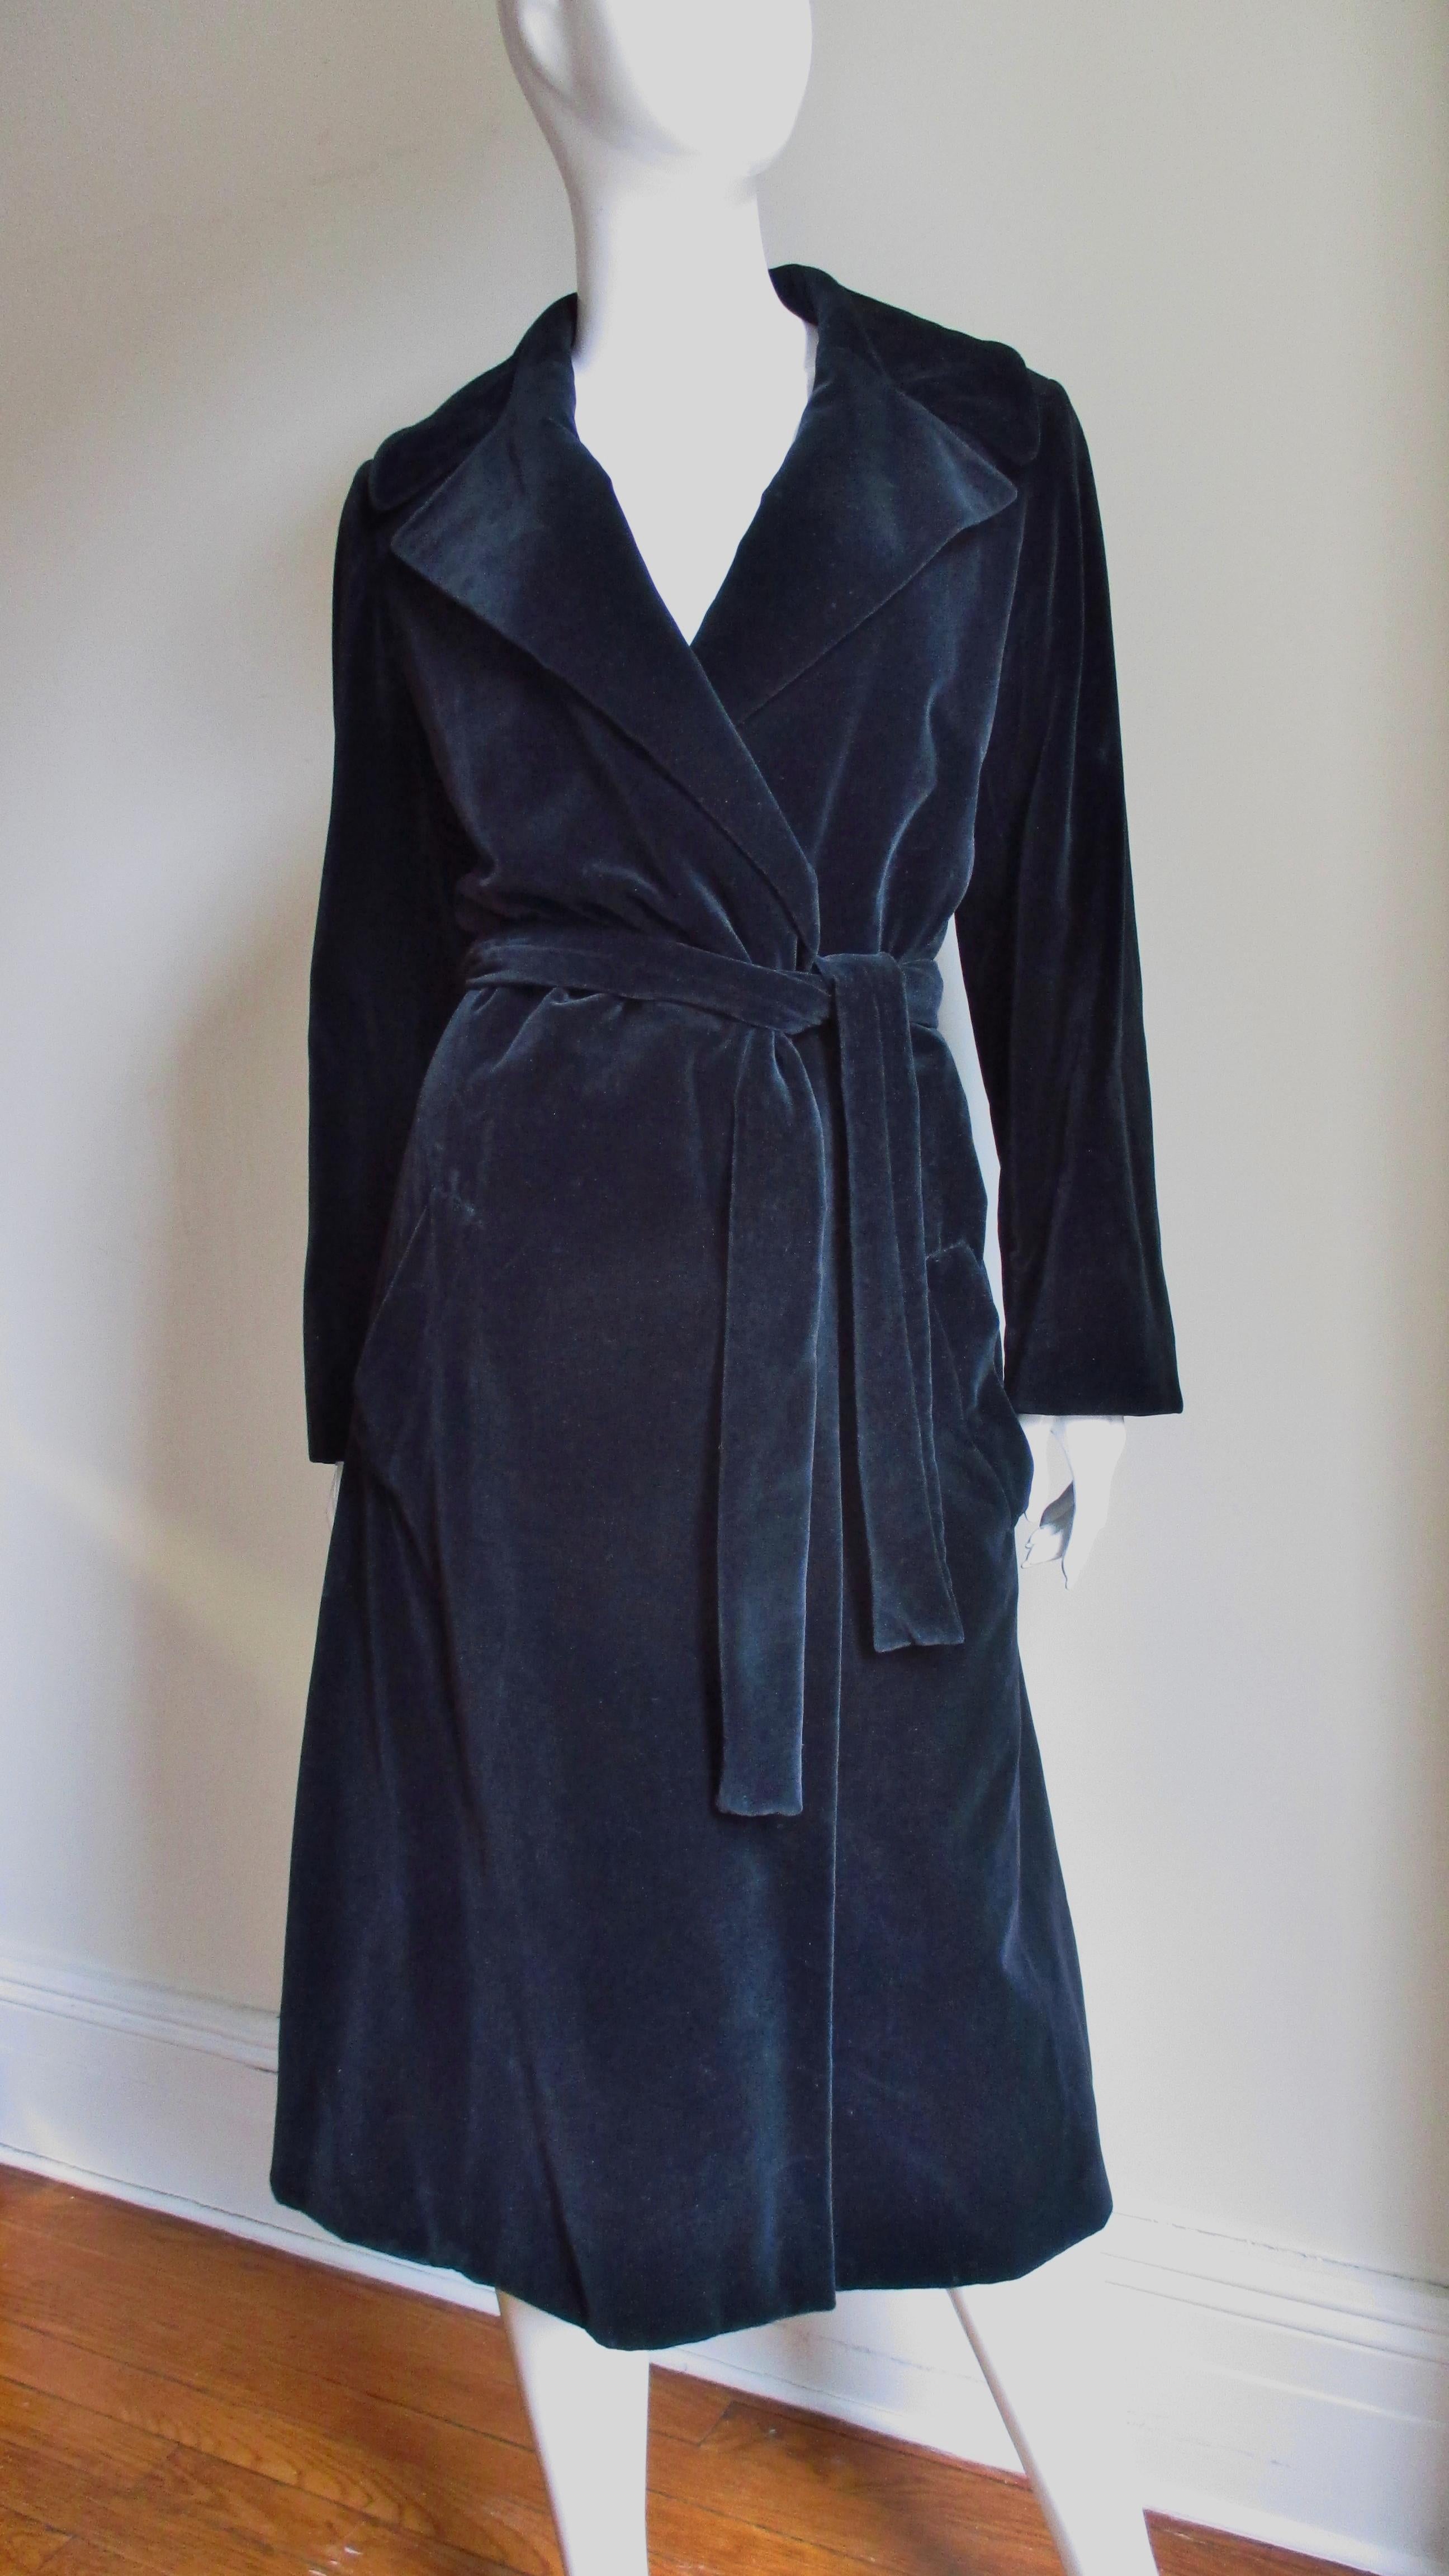 A fabulous example of 1970's Halston in this black velvet wrap trench coat.  It has a large notched collar, hip pockets and wraps tying closed with a matching belt.  It is fully lined in black silk and has 2 slant front pockets. 
Fits Small, Medium,